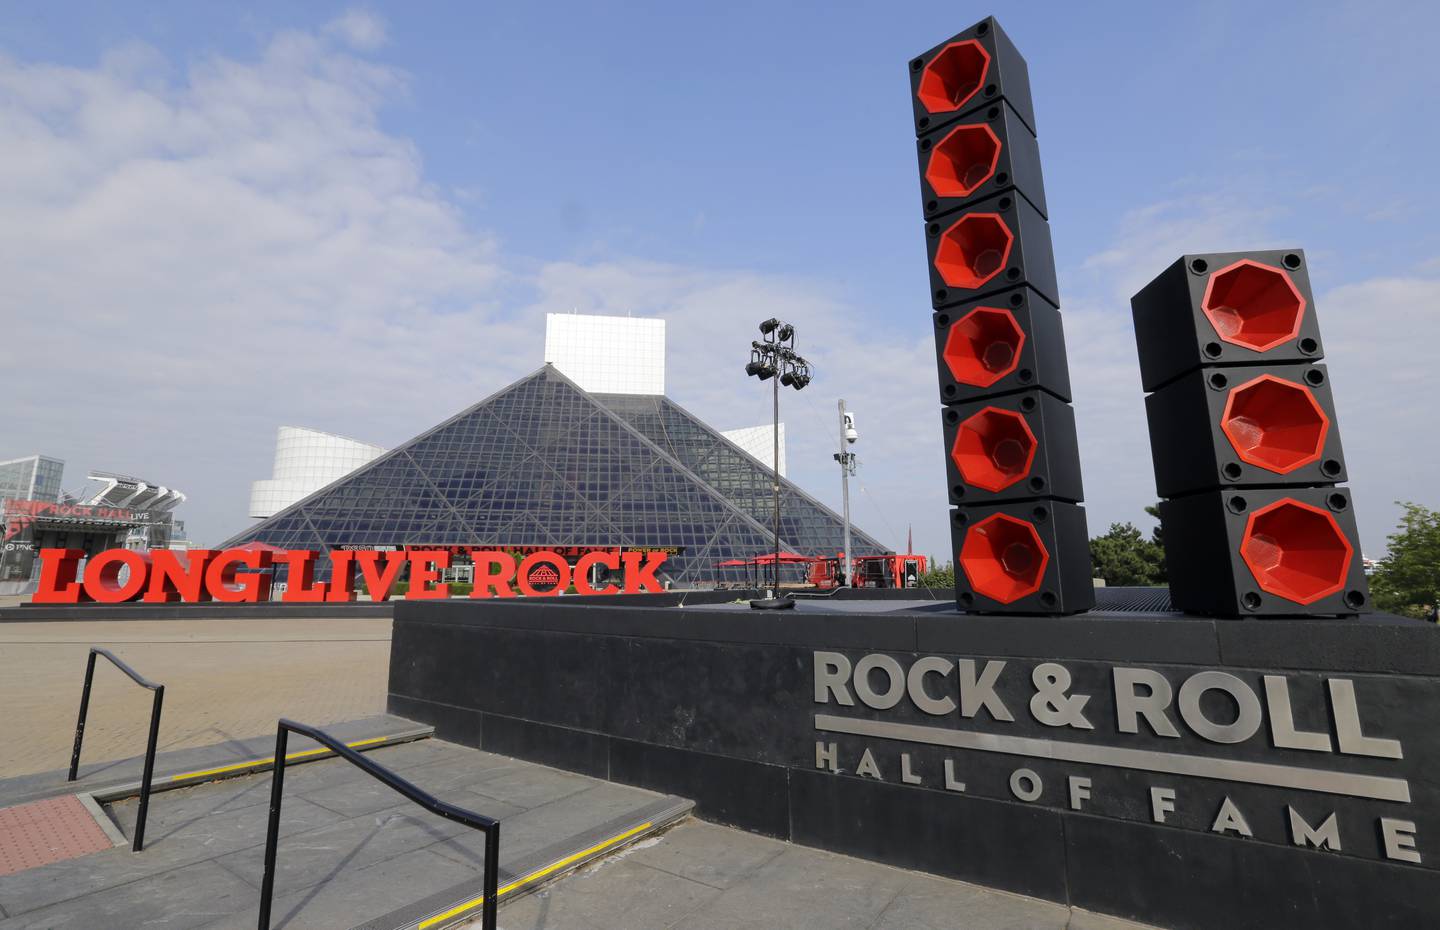 Rock And Roll Hall of Fame